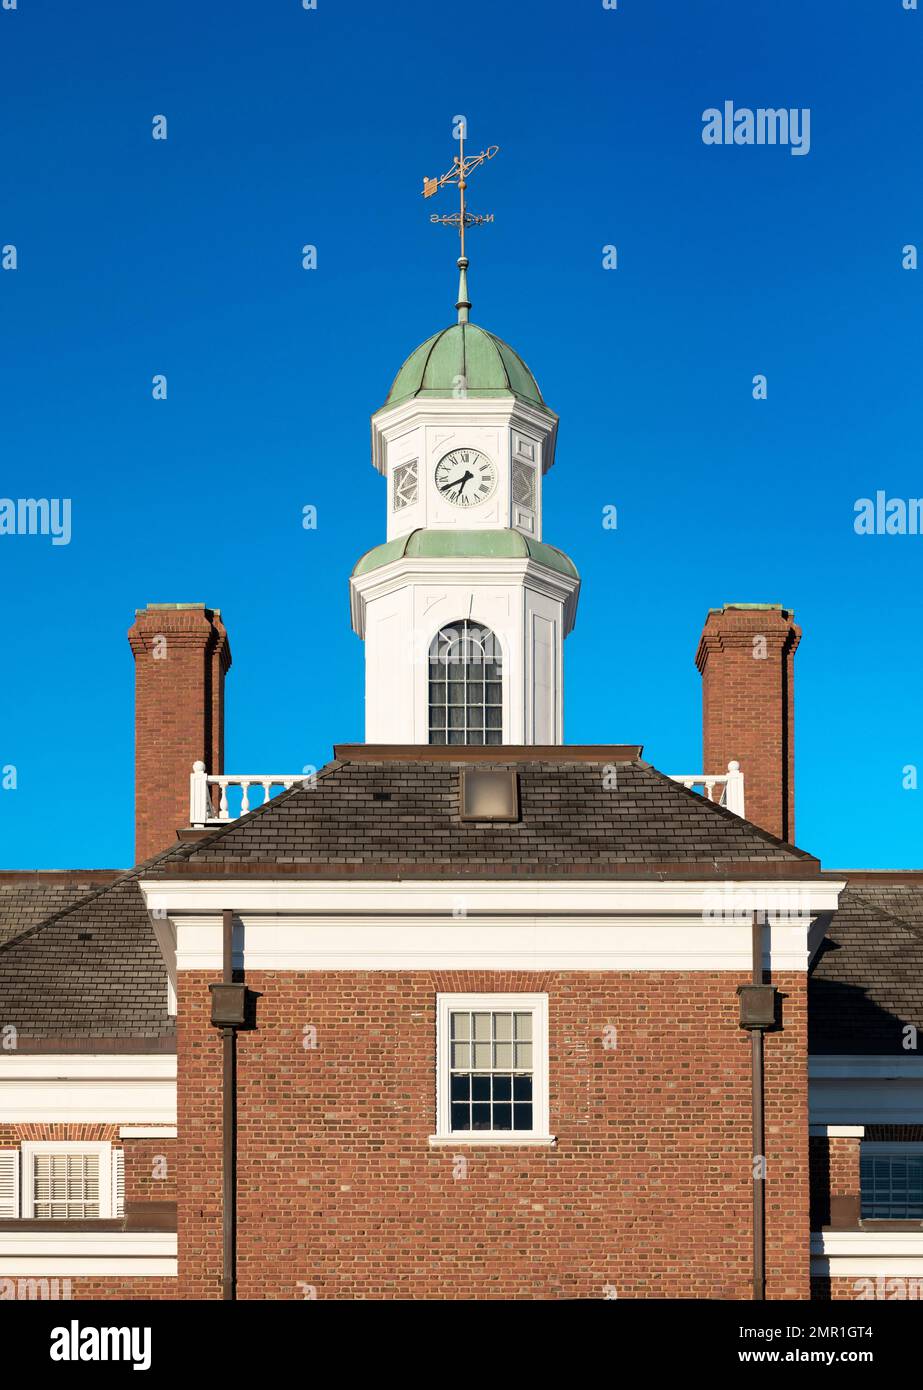 Colonial style architecture with weather vane. Stock Photo